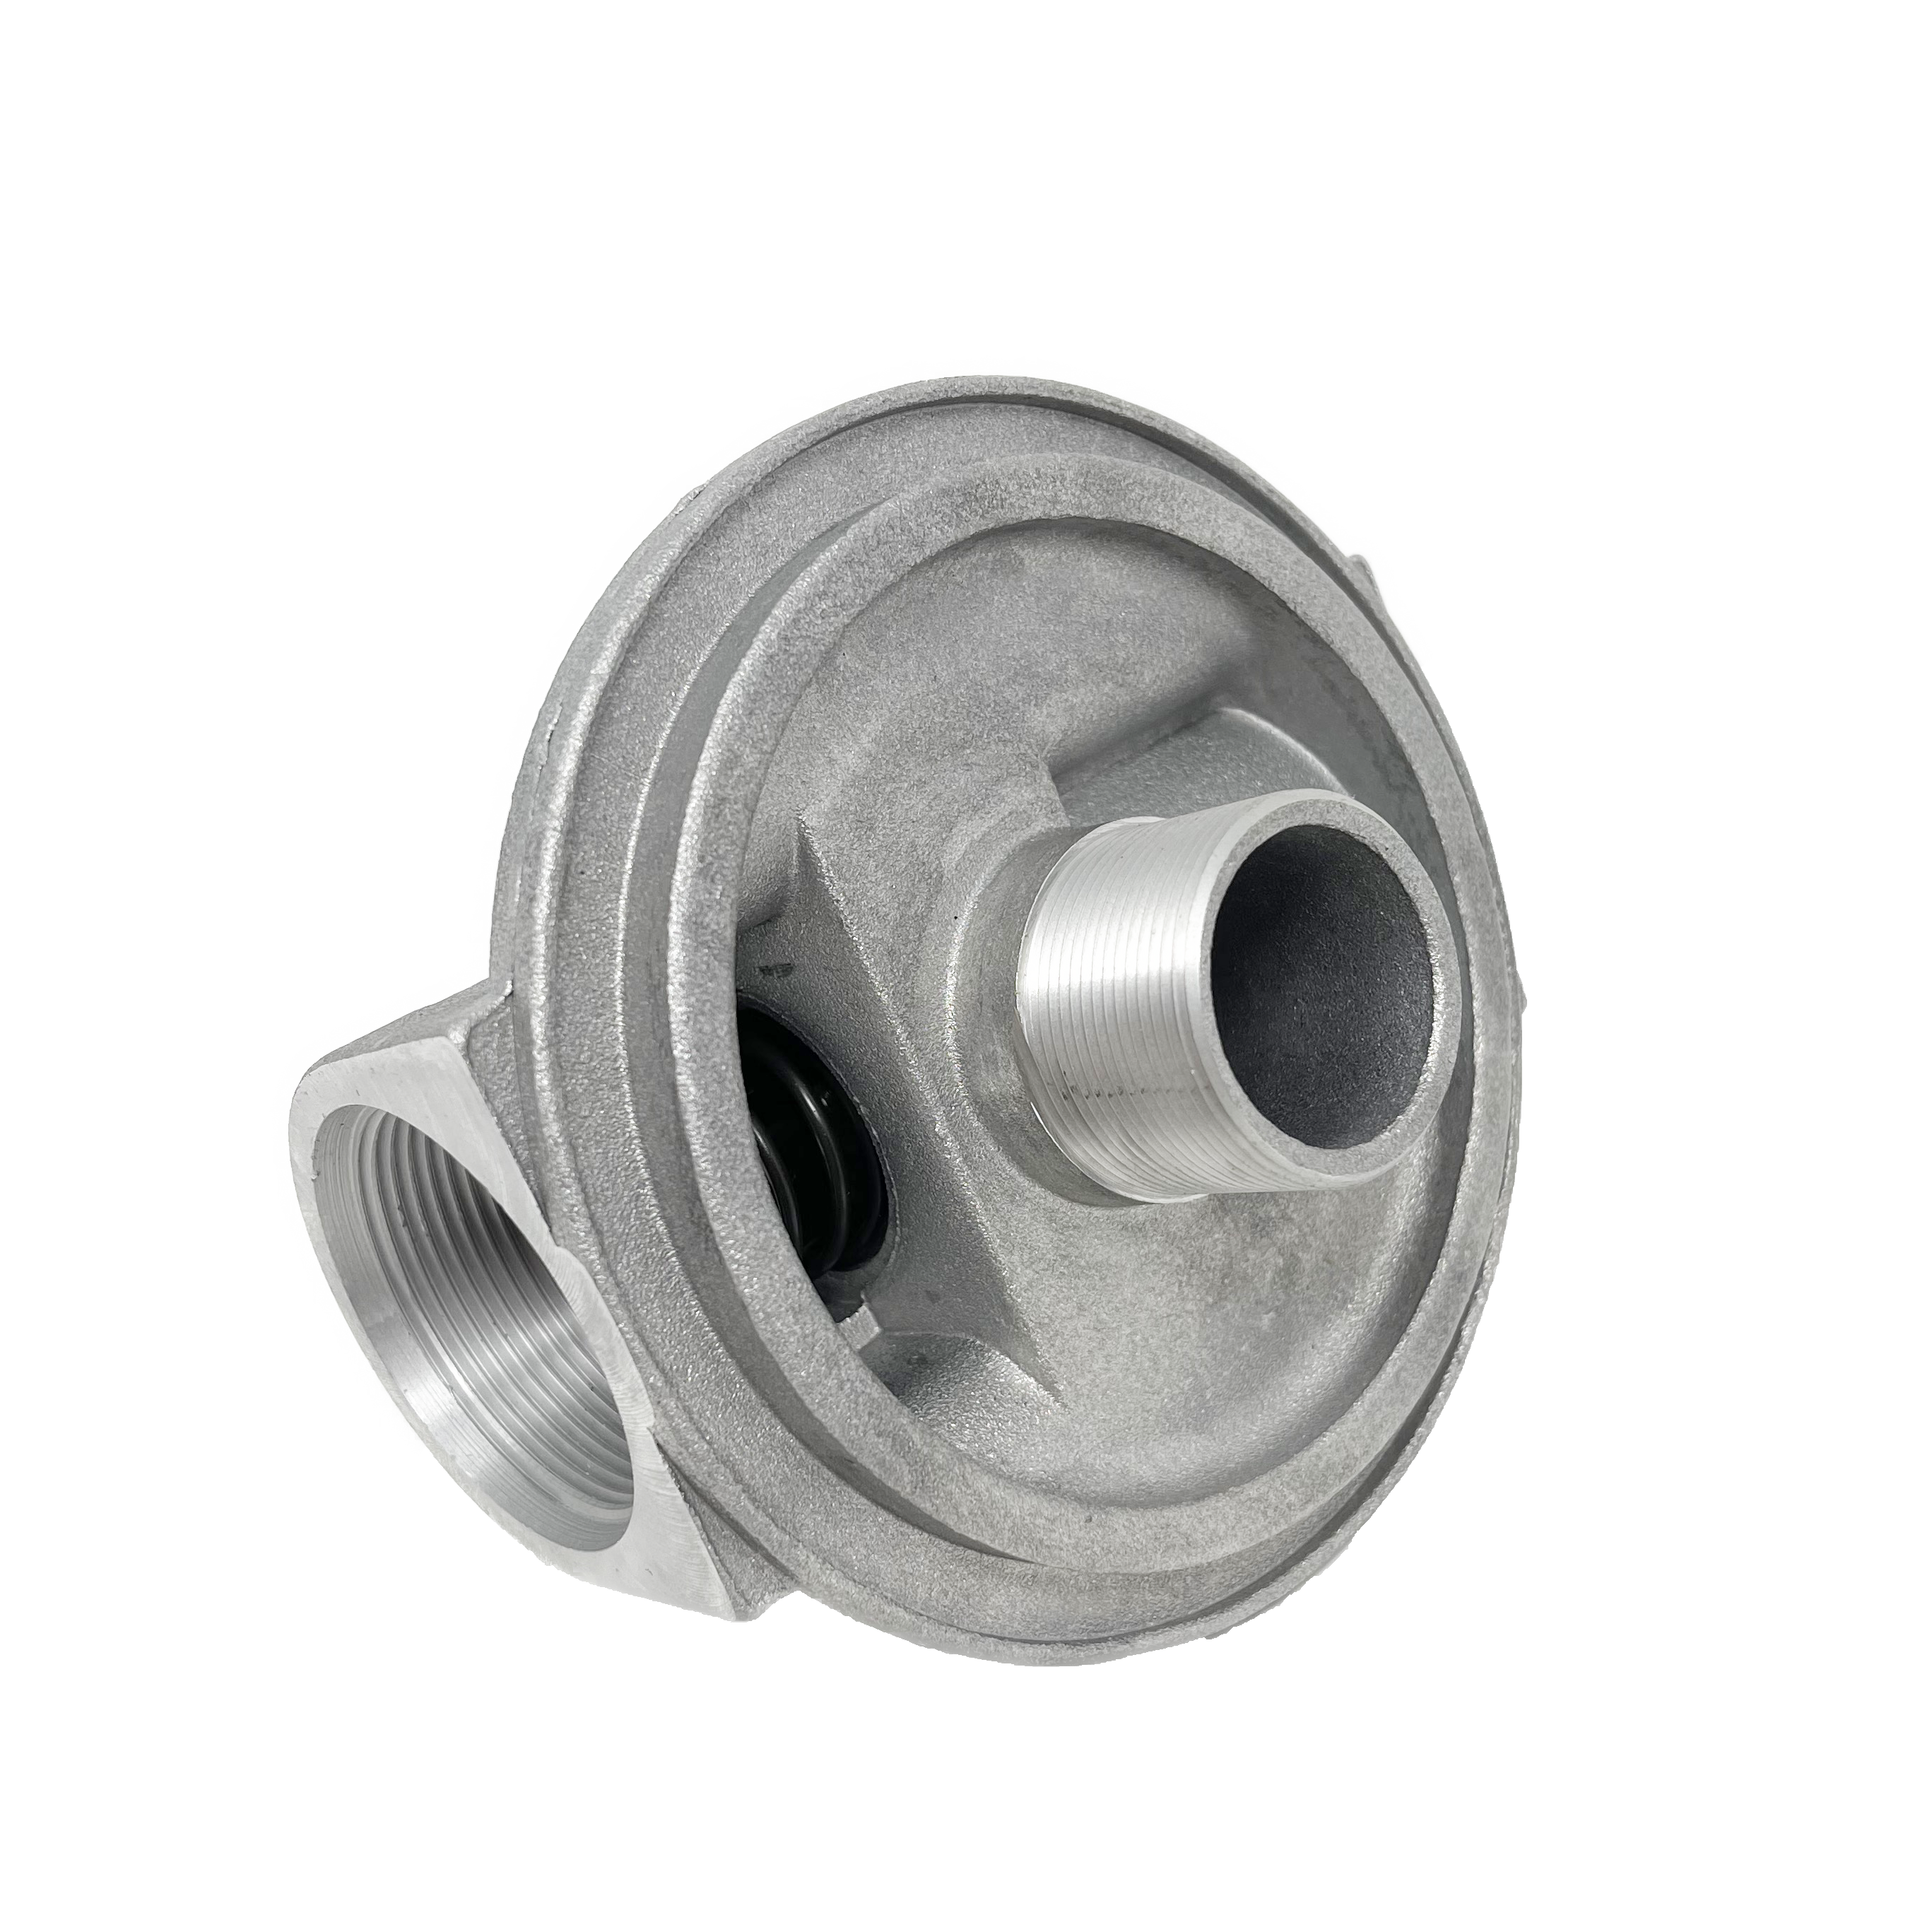 SSF-180-B1.7-1 : Stauff SSF Spin-On Filter Head, 80 GPM, 200psi, #24 SAE (1.5"), with Bypass, All clogging indicator ports drilled